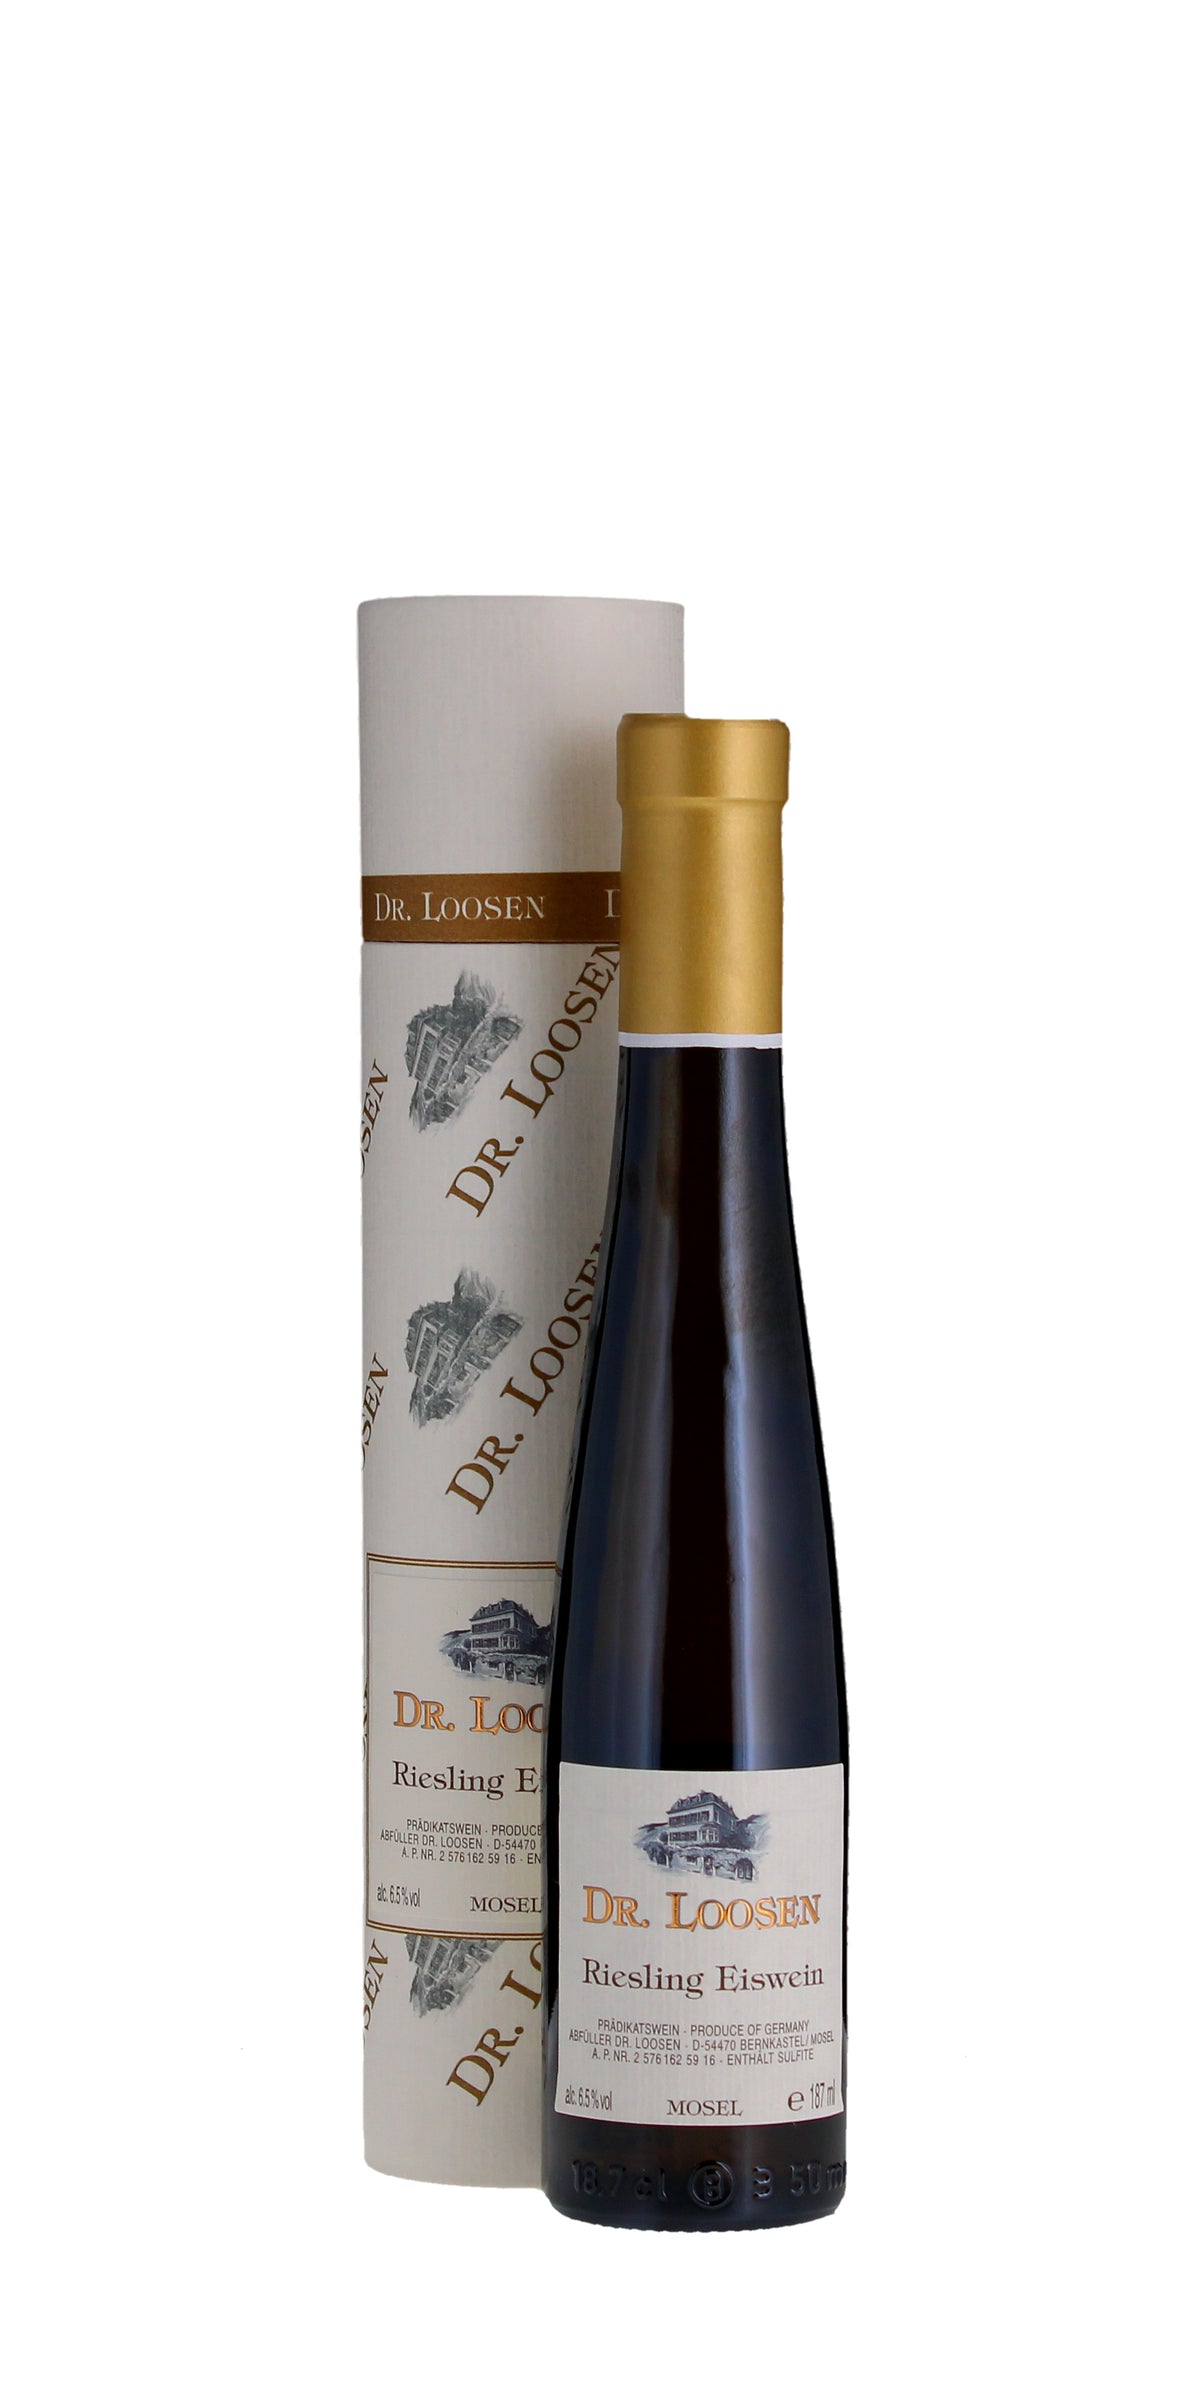 Dr Loosen Riesling Eiswein Mosel NV 187ml